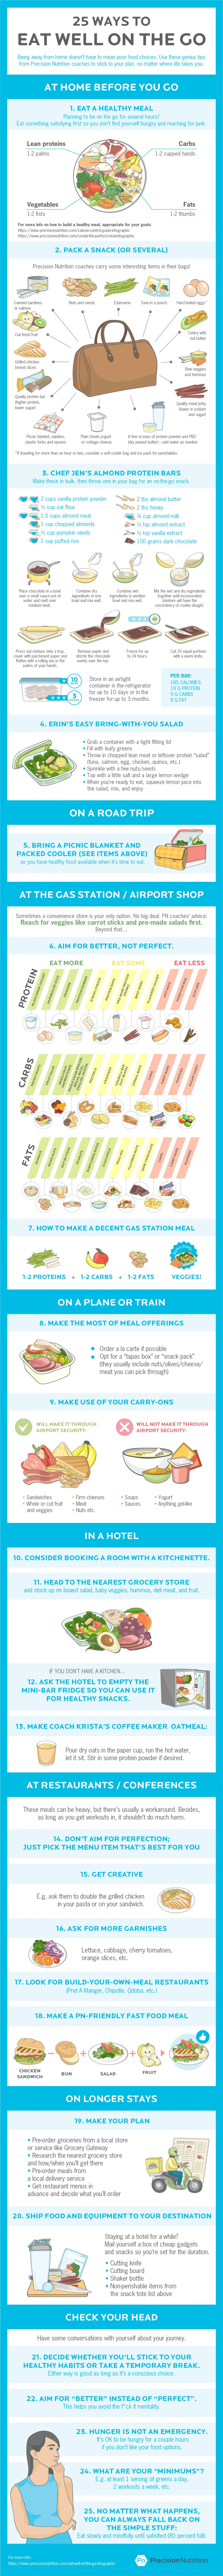 25 WAYS TO
EAT WELL ON THE GO

Being away from home di 't ha 0 mean poor food choices. Use these genus tips
from Precision Nutrition coache ick to your plan, no matter where life takes you

AT HOME BEFORE YOU GO

1. EAT A HEALTHY MEAL
Planning to be on the go for several hours?
Eat something satisfying first so you don't find yourself hungry and reaching for junk

Lean proteins Carbs
1-2 palms ¥ 9. 1-2 cupped hands

Vegetables < Fats
1-2 fists 1-2 thumbs

For more info on how to build a healthy meal, appropriate for your goals:
https: // www p> nutrition comy/c alone control gude nfographic
hHtos / sewn utribon comv/create the-perfectmealafographic

2. PACK A SNACK (OR SEVERAL)

Precision Nutrition coaches carry some interesting items in their bags!

Canned sardines Nuts and seeds dam Tuna n a pouch Hard boded eggs®

of sakmon
FE t &®@
GL! a \ /
LB \
“~~ \ /

Cut fresh fru Celery with

Raw vegges
and hummus

Quakty pete bar yd }
{hugher proten, Quaity meat jerky
ower sugar) Dower m sodum

Fn. and sugar)
SR
Zh

Pen blanket, naphans, n ut Atew scoops of proten powder and PB2
ks and spoons cot {dry peanut butter) - acd water as needed

“If traveing for more Bhan an hour of two, consider a soft cooler bag and ice pack for perrshables

3. CHEF JEN’S ALMOND PROTEIN BARS

Make these in bulk, then throw one in your bag for an on-the-go snack.

Ag 8g. 2 cups vanilla proten powder “Ses 2 tbs almond butter
Gm. V2 cup oat flour Sw 2 ths honey
a &ag, 1.5 cups almond meal eg, % cup almond milk
QR. cup chopped almonds &= > tsp almond extract
SY cup pumpkin pds Dw 2 tsp vanilla extract
1 cup pu 100 grams dark chocolate

c Comune wet
gedents mone ngredents mn another
bowl and mo well bowl and mux well

Remove paper and Freeze for up Cut 20 equal portions
druzzie the chocolate 10 24 hours with a warm knvfe

fatten with 2 roling pn of the evenly over the top.
ams of your hands
PER BAR:
Store in an airtight 185 CALORIES
container in the refrigerator 19 G PROTEN
for up to 10 days or in the 9G CARBS
freezer for up to 3 months 9G FAT

4. ERIN'S EASY BRING-WITH-YOU SALAD

« Grab a container with a tight fitting lid

* Fill with leafy greens

* Throw in chopped lean meat or leftover protein “salad”
(tuna, salmon, egg, chicken, quinoa, etc.)

* Sprinkle with a few nuts/seeds

Top with a little salt and a large lemon wedge

* When you're ready to eat, squeeze lemon juice into
the salad, mix, and enjoy

5S. BRING A PICNIC BLANKET AND
PACKED COOLER (SEE ITEMS ABOVE)

$0 you have healthy food available when it's time to eat.

 

AT THE GAS STATION / AIRPORT SHOP

Sometimes a convenience store is your only option. No big deal. PN coaches’ advice:
Reach for veggies like carrot sticks and pre-made salads first.
Beyond that

6. AIM FOR BETTER, NOT PERFECT.

EAT MORE EAT LESS

7. HOW TO MAKE A DECENT GAS STATION MEAL

1-2 PROTEINS + 1-2 CARBS + 1-2FATS VEGGIES!

 

ON A PLANE OR TRAIN

8. MAKE THE MOST OF MEAL OFFERINGS

A ® Order ala carte if possible
e Opt for a “tapas box” or “snack pack”
(they usually include nuts/olives/cheese/

meat you can pick through)

9. MAKE USE OF YOUR CARRY-ONS

WILL MAKE IT THROUGH WILL NOT MAKE IT THROUGH
AIRPORT SECURITY: AIRPORT SECURITY:

Sandwiches Frm cheeses * Soups * Yogurt
Whoie or cut frut Meat * Sauces * Anything geliike
and veggies Nuts etc.

IN AHOTEL

10. CONSIDER BOOKING A ROOM WITH A KITCHENETTE.

1. HEAD TO THE NEAREST GROCERY STORE
and stock up on boxed salad, baby veggies, hummus, deli meat, and fruit

IF YOU DON'T HAVE A KITCHEN...

12. ASK THE HOTEL TO EMPTY THE
MINI-BAR FRIDGE SO YOU CAN USE IT
FOR HEALTHY SNACKS.

Pour dry oats in the paper cup, run the hot water,
let it sit. Stir in some protein powder if desired

AT RESTAURANTS / CONFERENCES

These meals can be heavy, but there's usually a workaround. Besides,
as long as you get workouts in, it shouldn't do much harm.

14. DON'T AIM FOR PERFECTION;
JUST PICK THE MENU ITEM THAT'S BEST FOR YOU

15. GET CREATIVE

E.g. ask them to double the grilled chicken
in your pasta or on your sandwich.

Lettuce, cabbage, cherry tomatoes,
orange slices, etc.

17. LOOK FOR BUILD-YOUR-OWN-MEAL RESTAURANTS
(Pret A Manger, Chipotle, Qdoba, etc.)

18. MAKE A PN-FRIENDLY FAST FOOD MEAL

CHICKEN
SANDWICH

19. MAKE YOUR PLAN

* Pre-order groceries from a local store
or service like Grocery Gateway

* Research the nearest grocery store
and how/when you'll get there

* Pre-order meals from

a local delivery service

* Get restaurant menus in

advance and decide what you'll order

20. SHIP FOOD AND EQUIPMENT TO YOUR DESTINATION

Staying at a hotel for a while?
Mail yourself a box of cheap gadgets
and snacks so you're set for the duration

Cutting knife

Cutting board

Shaker bottle

* Non-perishable items from
the snack tote list above

 

CHECK YOUR HEAD

Have some conversations with yourself about your journey

21. DECIDE WHETHER YOU'LL STICK TO YOUR
HEALTHY HABITS OR TAKE ATEMPORARY BREAK.
Either way is good as long as it's a conscious choice.

22. AIM FOR “BETTER” INSTEAD OF “PERFECT”.
This helps you avoid the f*ck it mentality.

23. HUNGER IS NOT AN EMERGENCY.
It's OK to be hungry for a couple hours
if you don't like your food options.

24. WHAT ARE YOUR "MINIMUMS"?
E.g. atleast 1 serving of greens a day,
2 workouts a week, etc.

25. NO MATTER WHAT HAPPENS,
YOU CAN ALWAYS FALL BACK ON
THE SIMPLE STUFF:

Eat slowly and mindfully until satisfied (80 percent full)